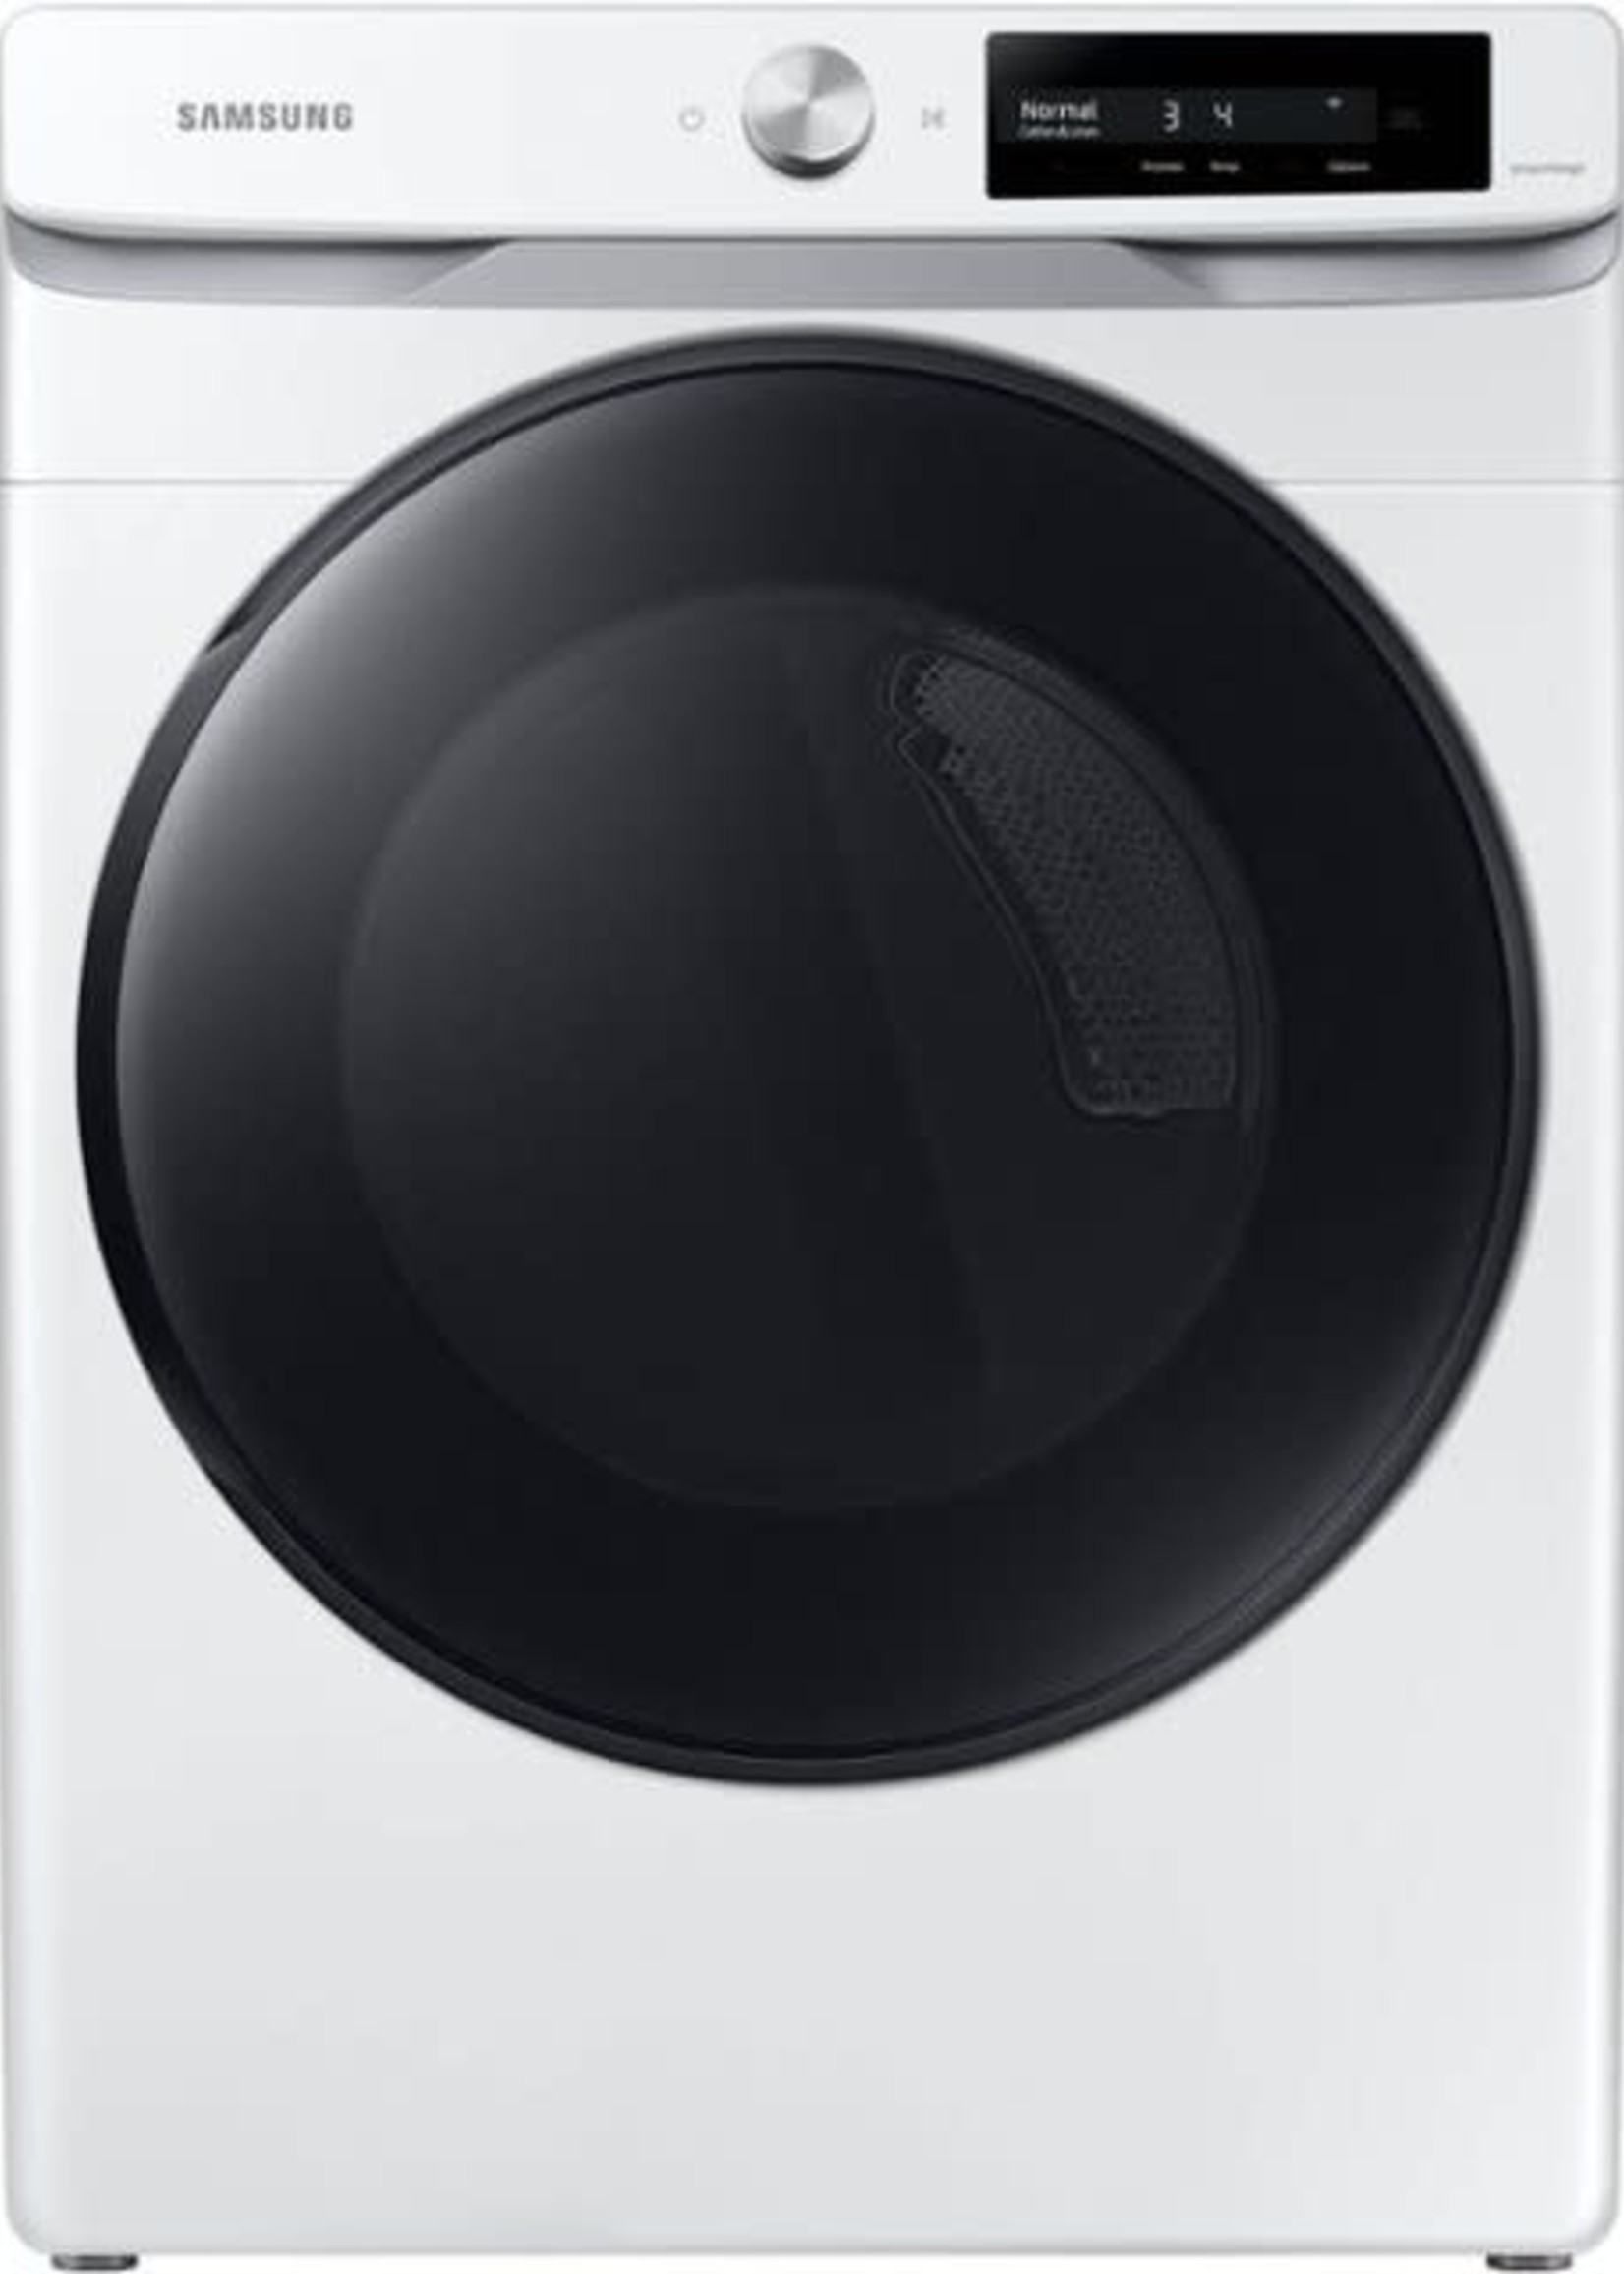 Samsung *Samsung  DVE45A6400W  7.5 cu. ft. Smart Dial Electric Dryer with Super Speed Dry - White